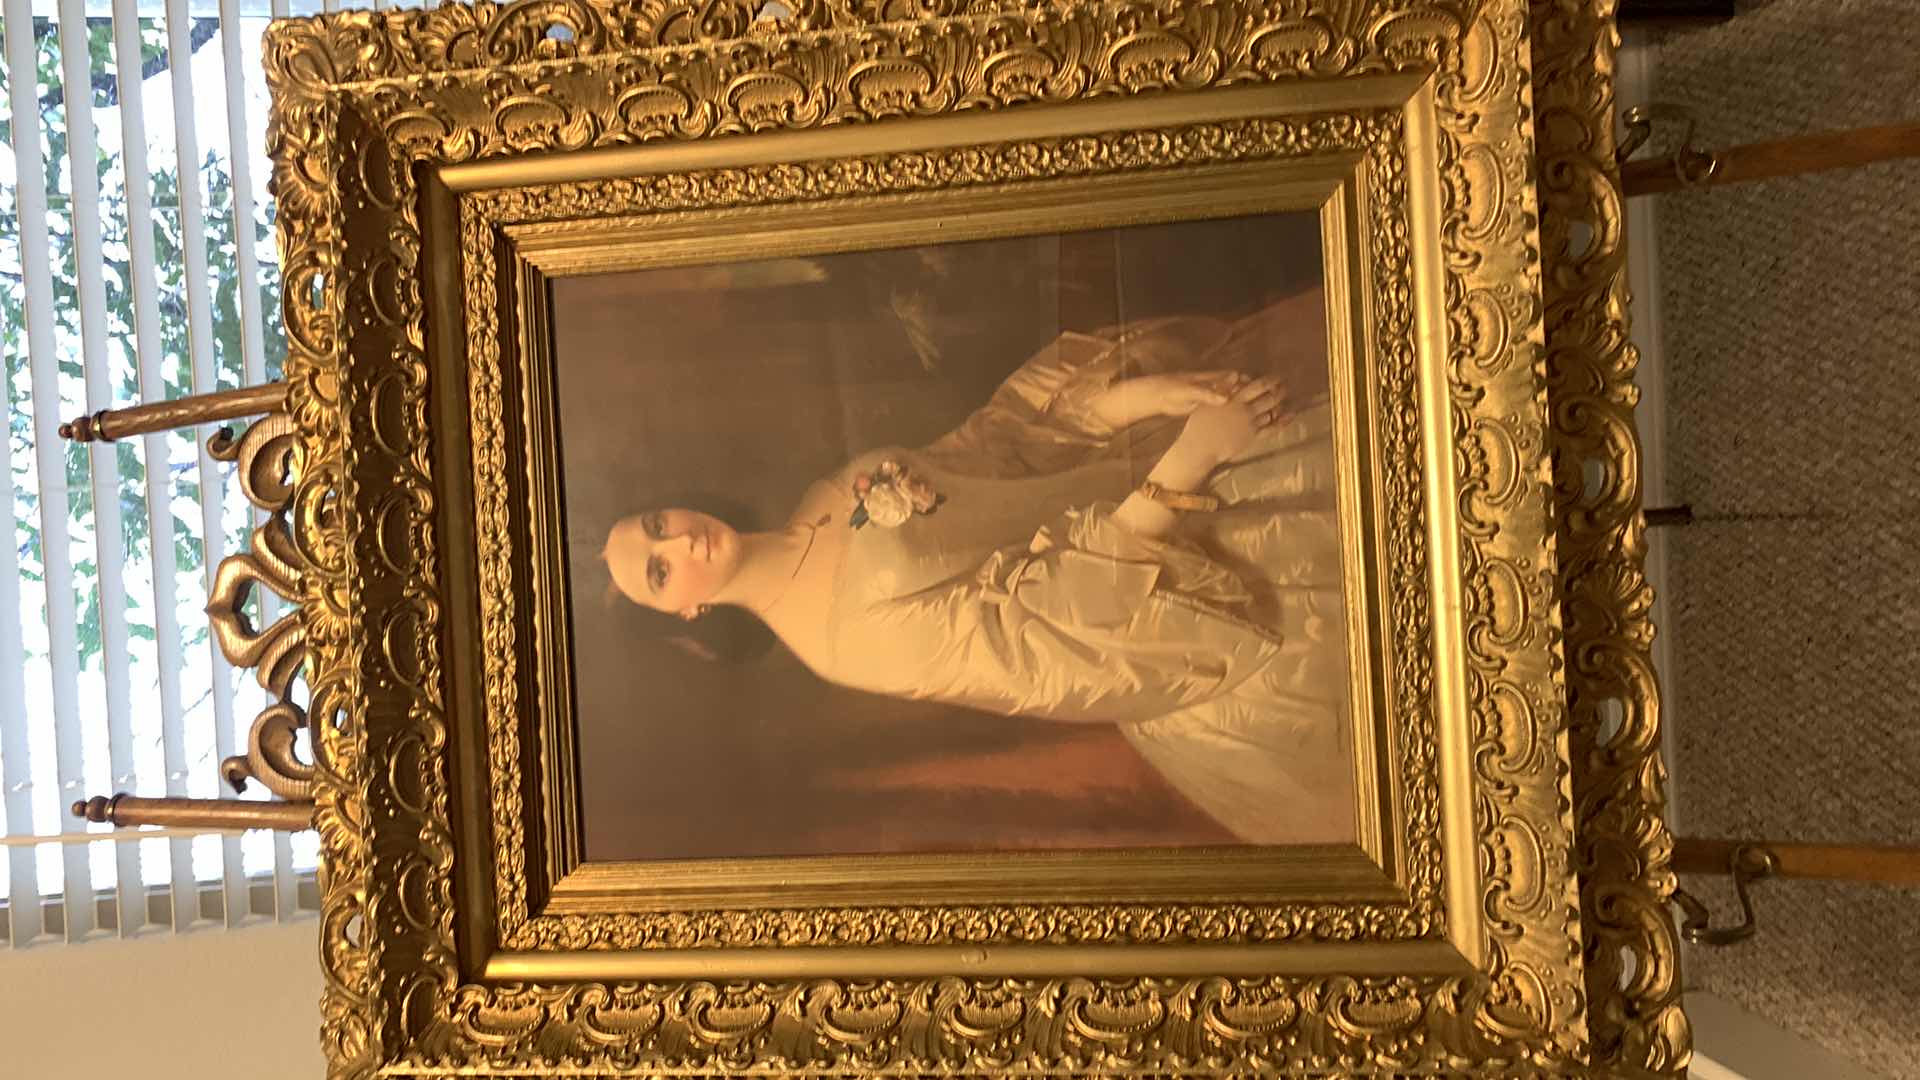 Photo 2 of A framed vintage reproduction of “Southern Belle” by Erich Correns:, Artist: Erich Correns ( 1821 - 1877) Munich, German München., Erich Correns ...
Priced without elaborate frame approx $1200 (stand not included)